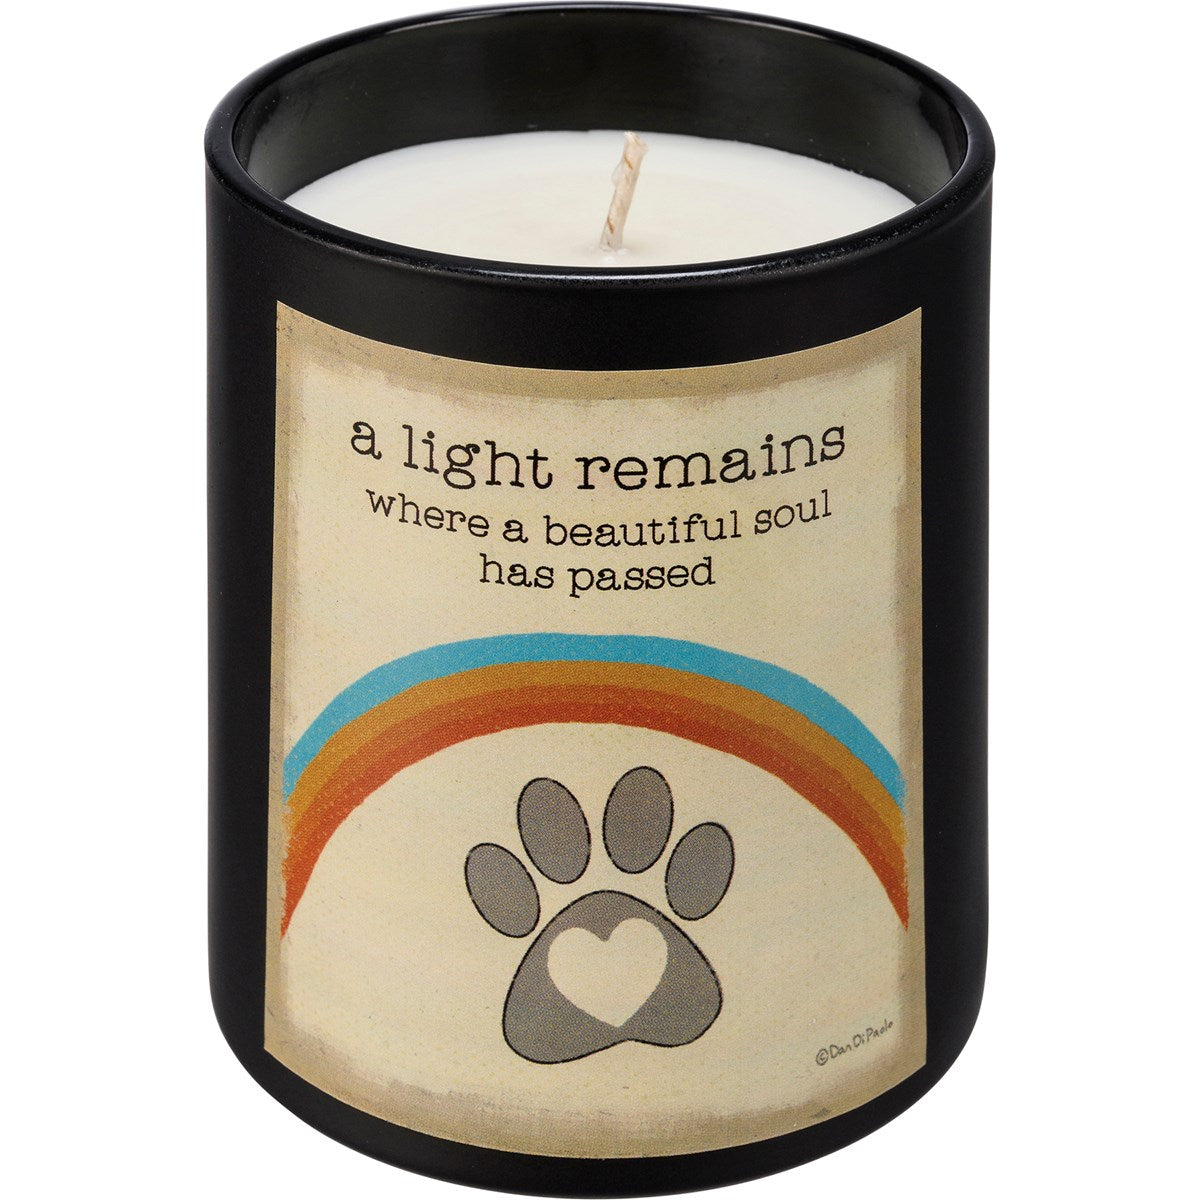 Light Remains A Beautiful Soul Passed Jar Candle-Candles > Home & Garden > Decor > Home Fragrances > Candles-Quinn's Mercantile